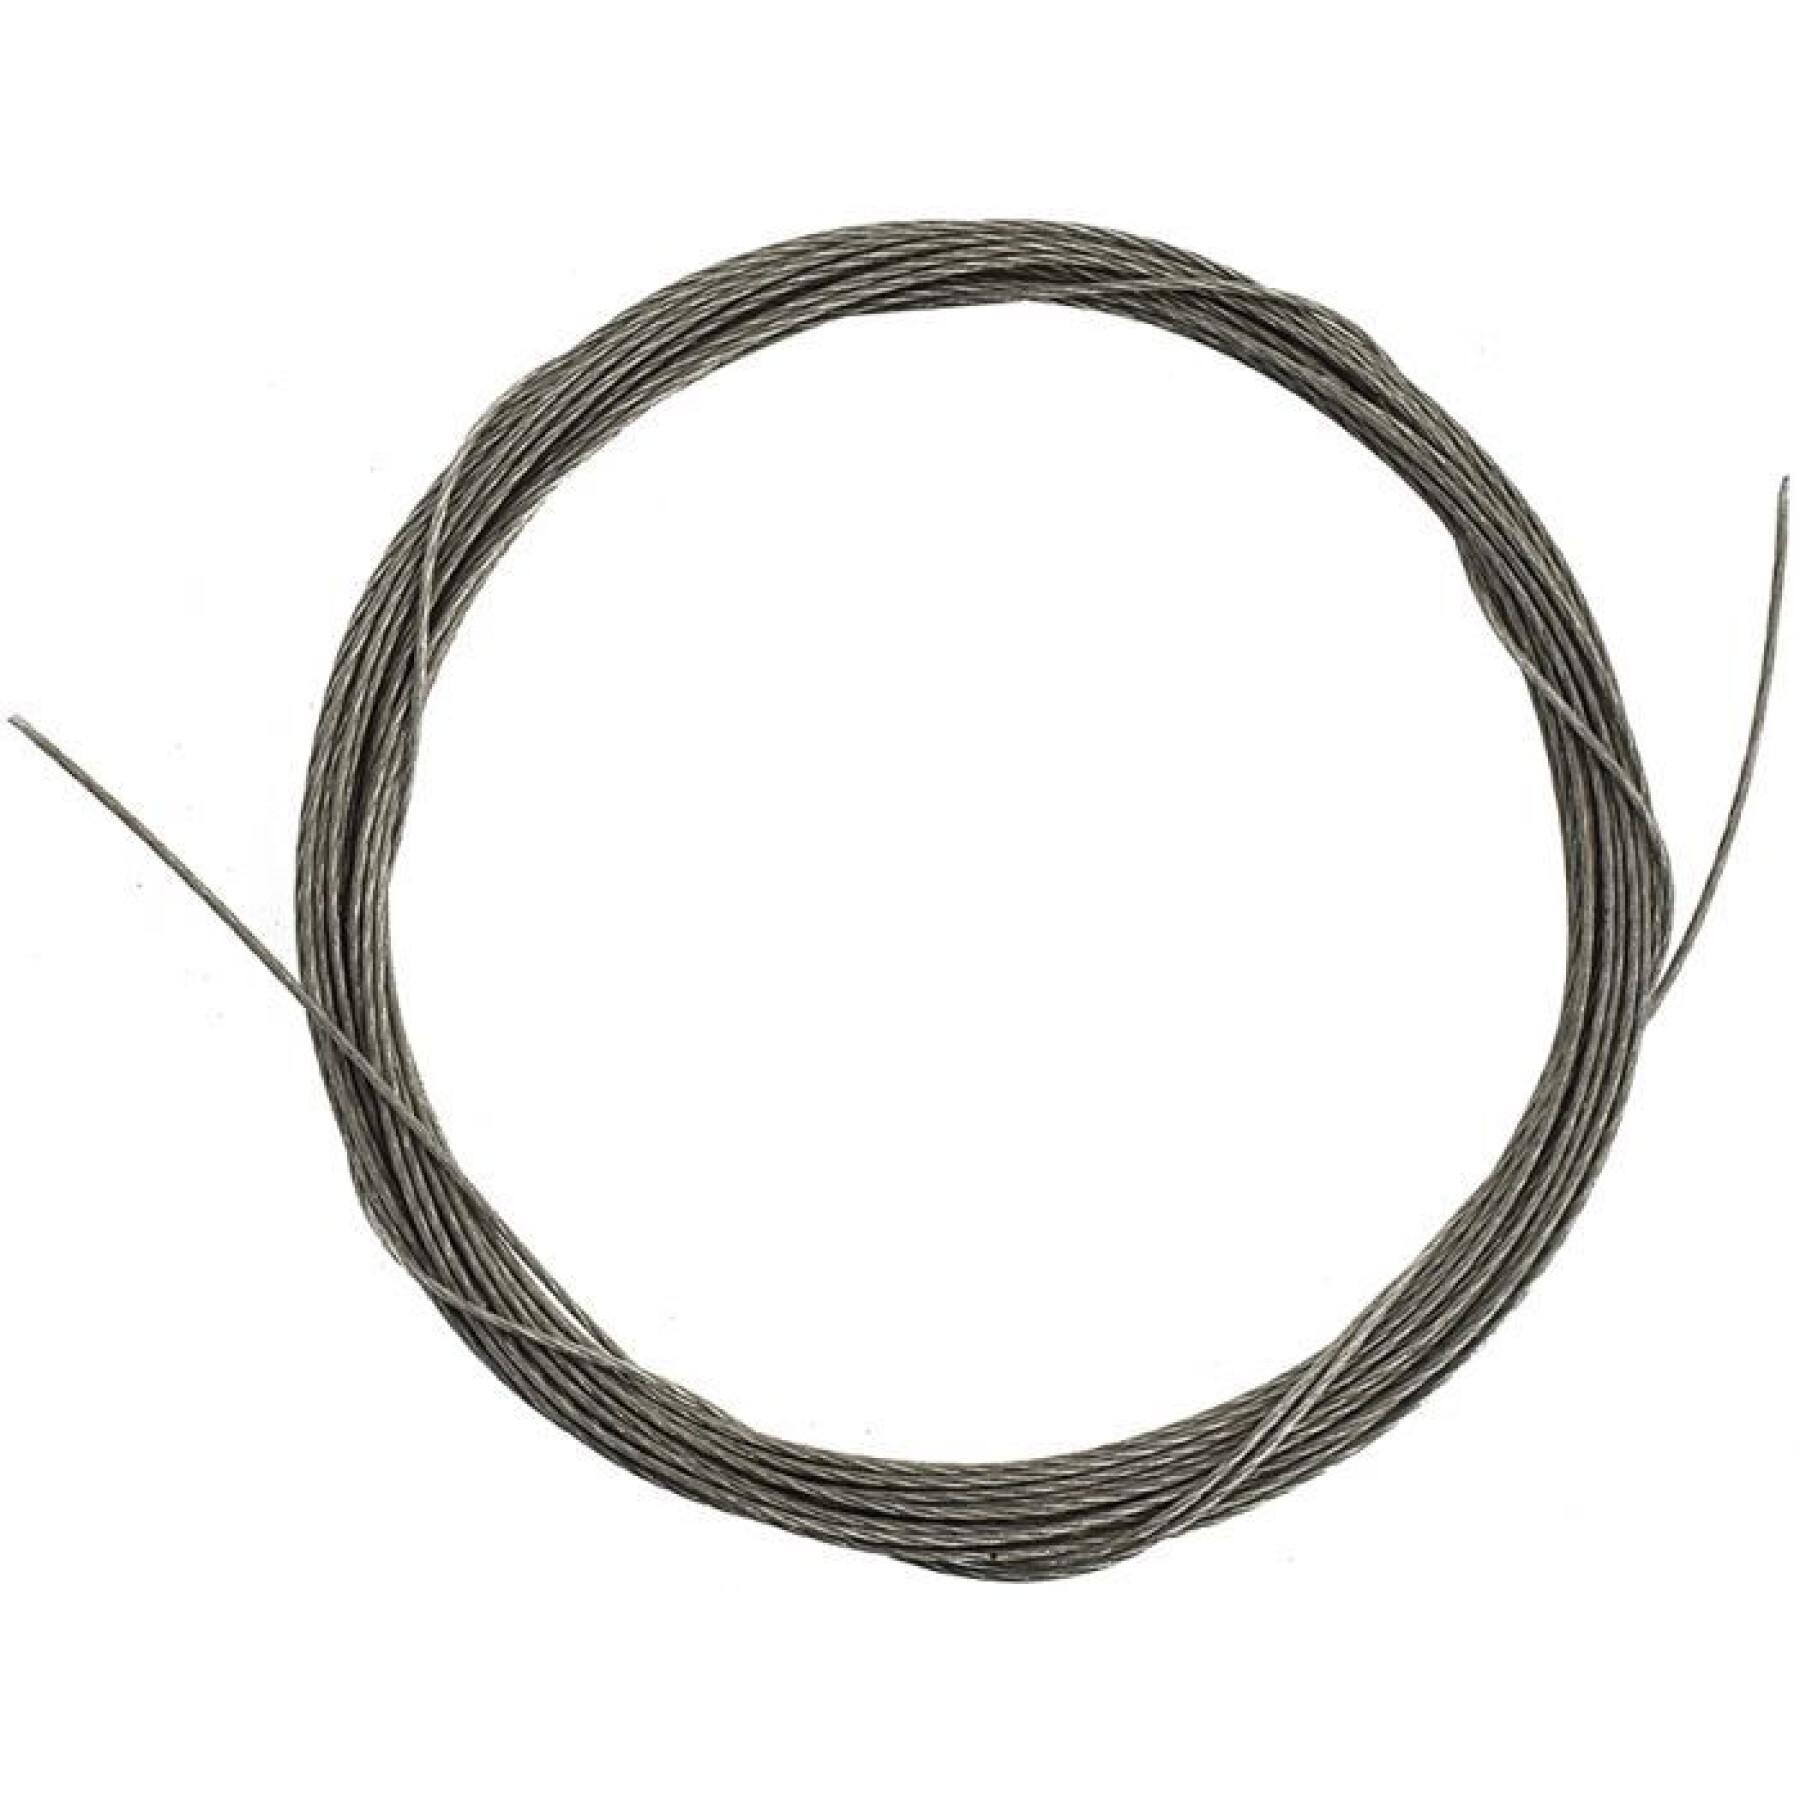 Bottom of the line Decoy Wl 70 N Coated Wire 46